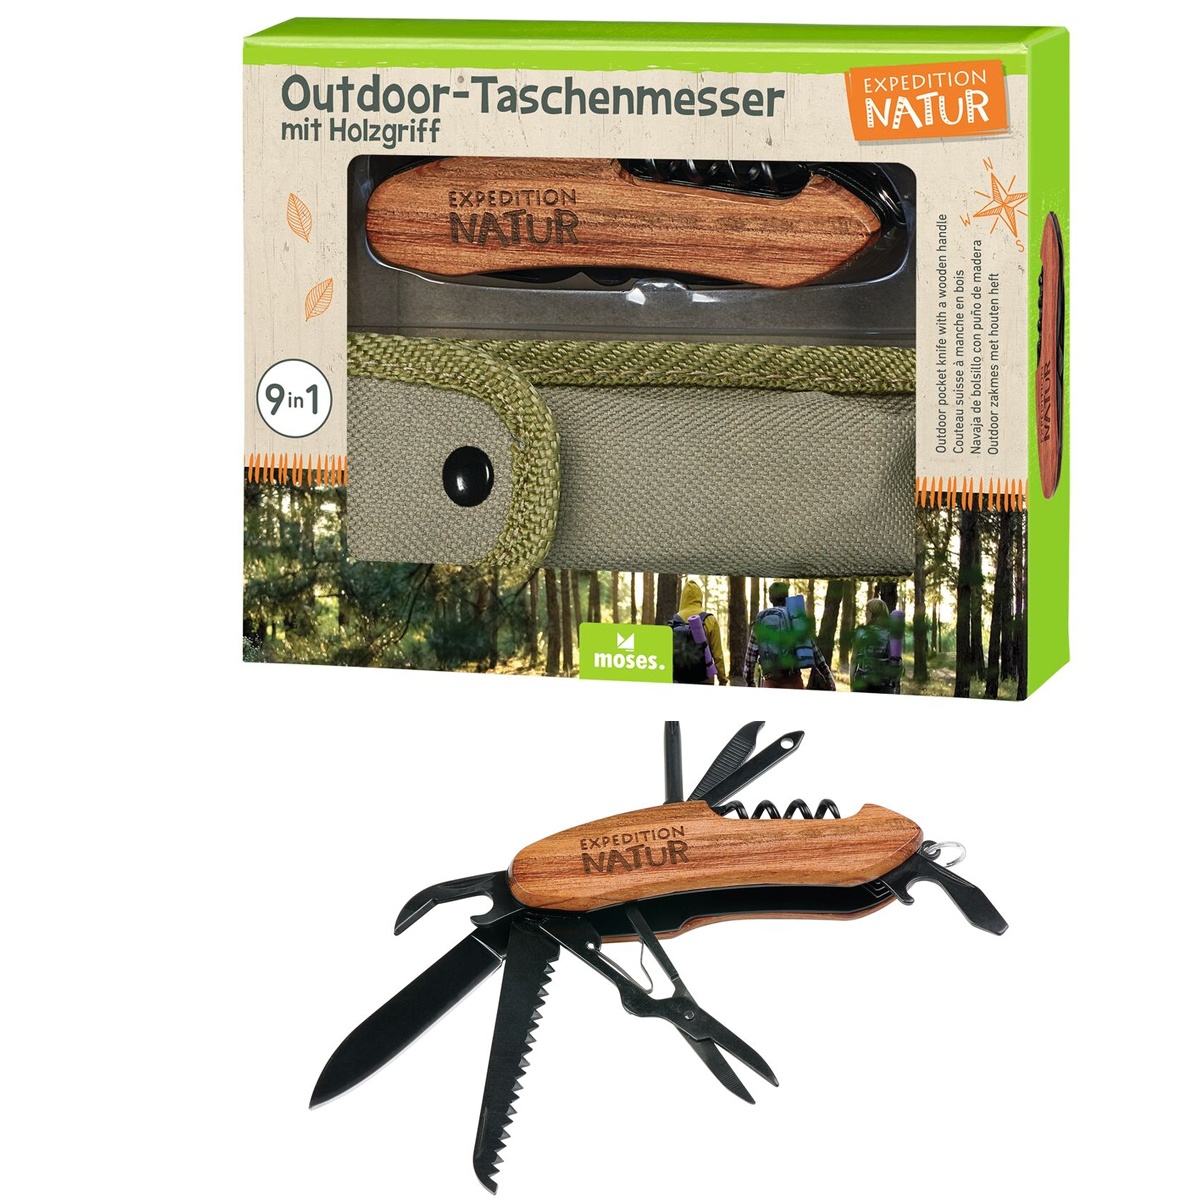 Expedition Natur Outdoor-Taschenmesser mit Holzgriff moses